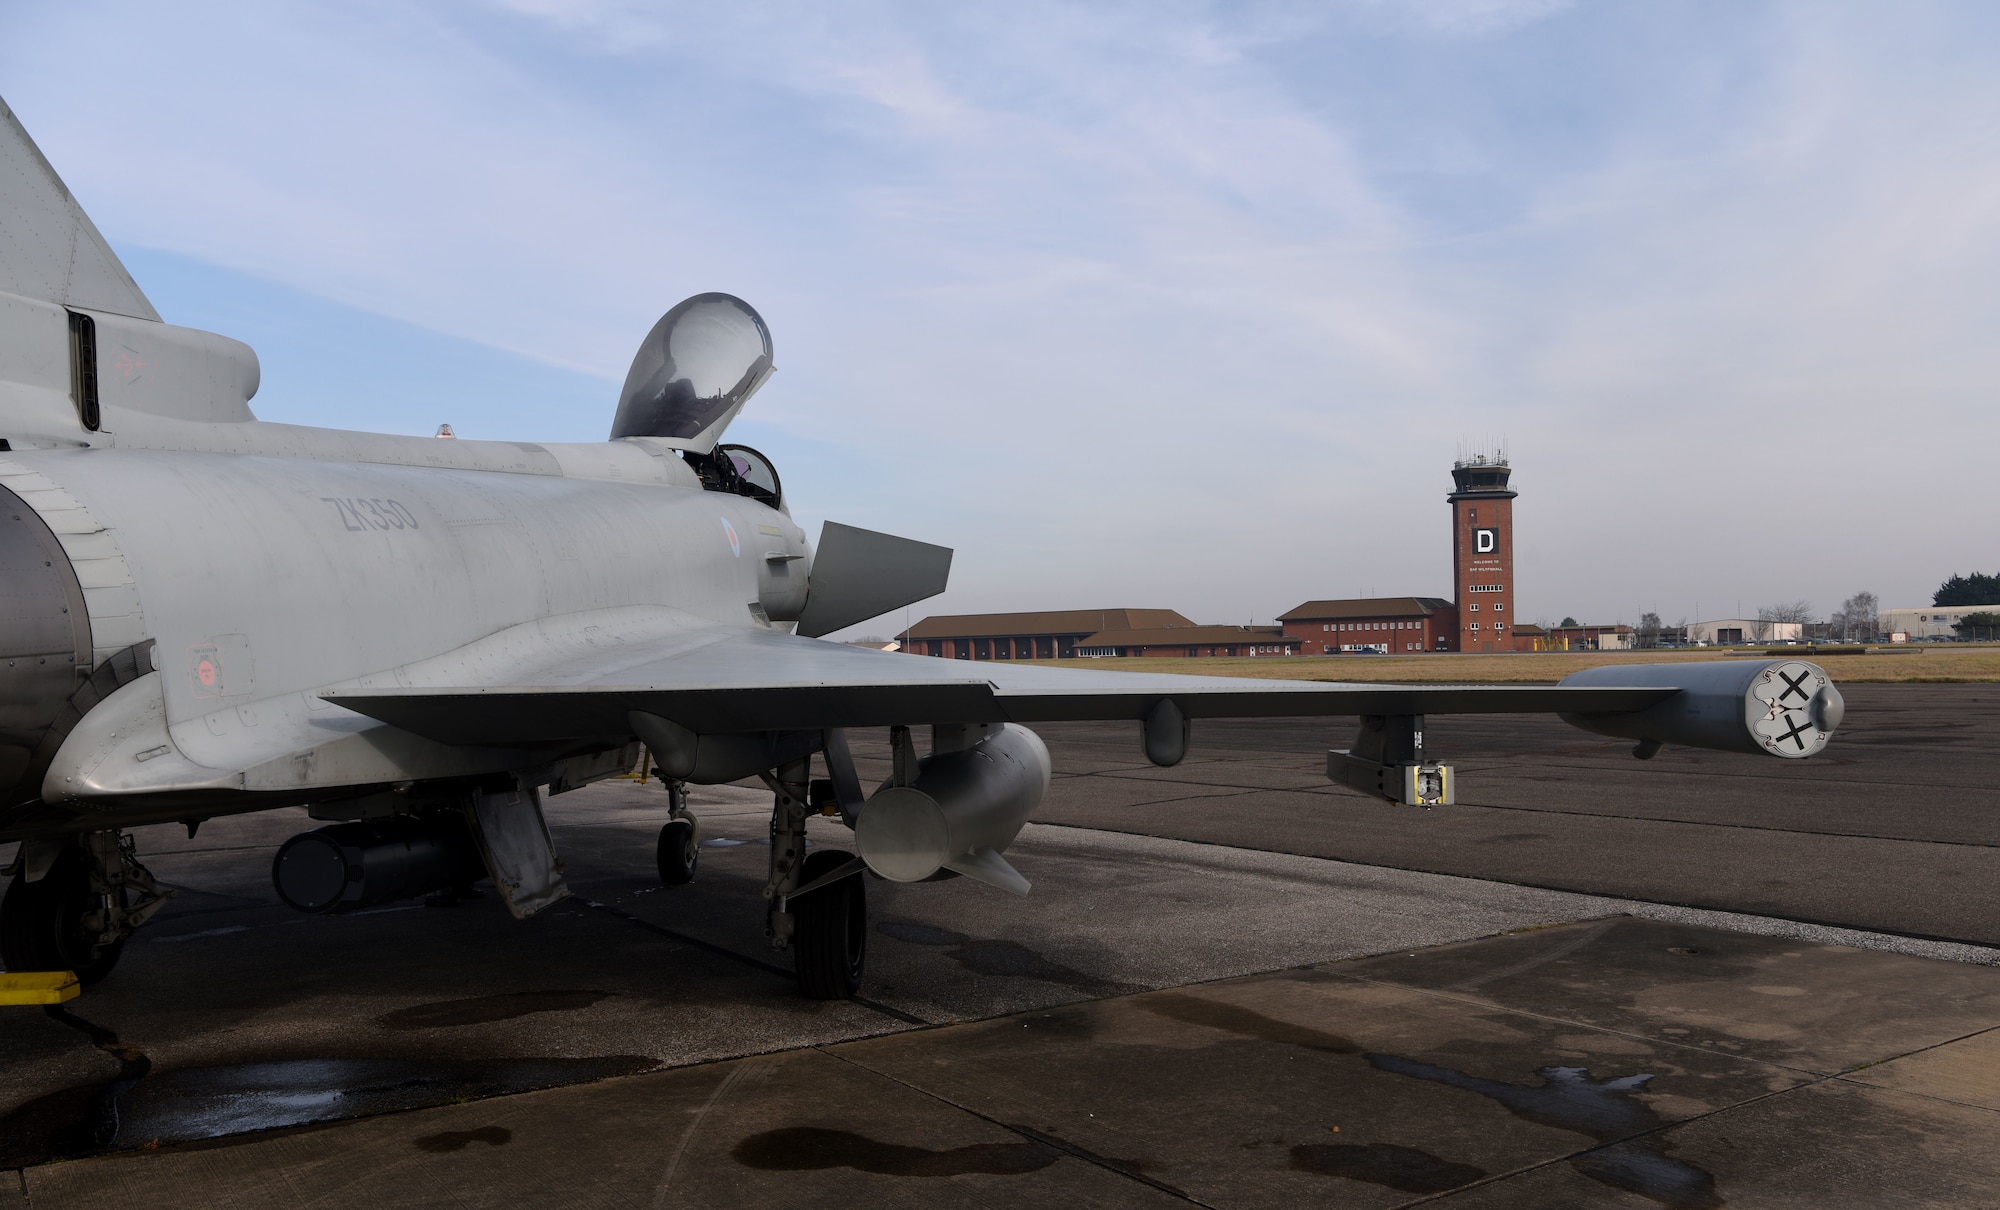 A Royal Air Force Eurofighter Typhoon sits on the taxiway at Royal Air Force Mildenhall, England, Feb. 15, 2023. The aircraft, from RAF Coningsby, England, diverted here due to bad weather. The Typhoon is a highly capable and extremely agile multi-role combat aircraft, and the pilot performs many essential functions through the aircraft’s hands on throttle and stick interface which, combined with an advanced cockpit and the helmet equipment assembly, renders the Typhoon superbly equipped for all aspects of air operations. (U.S. Air Force photo by Karen Abeyasekere)